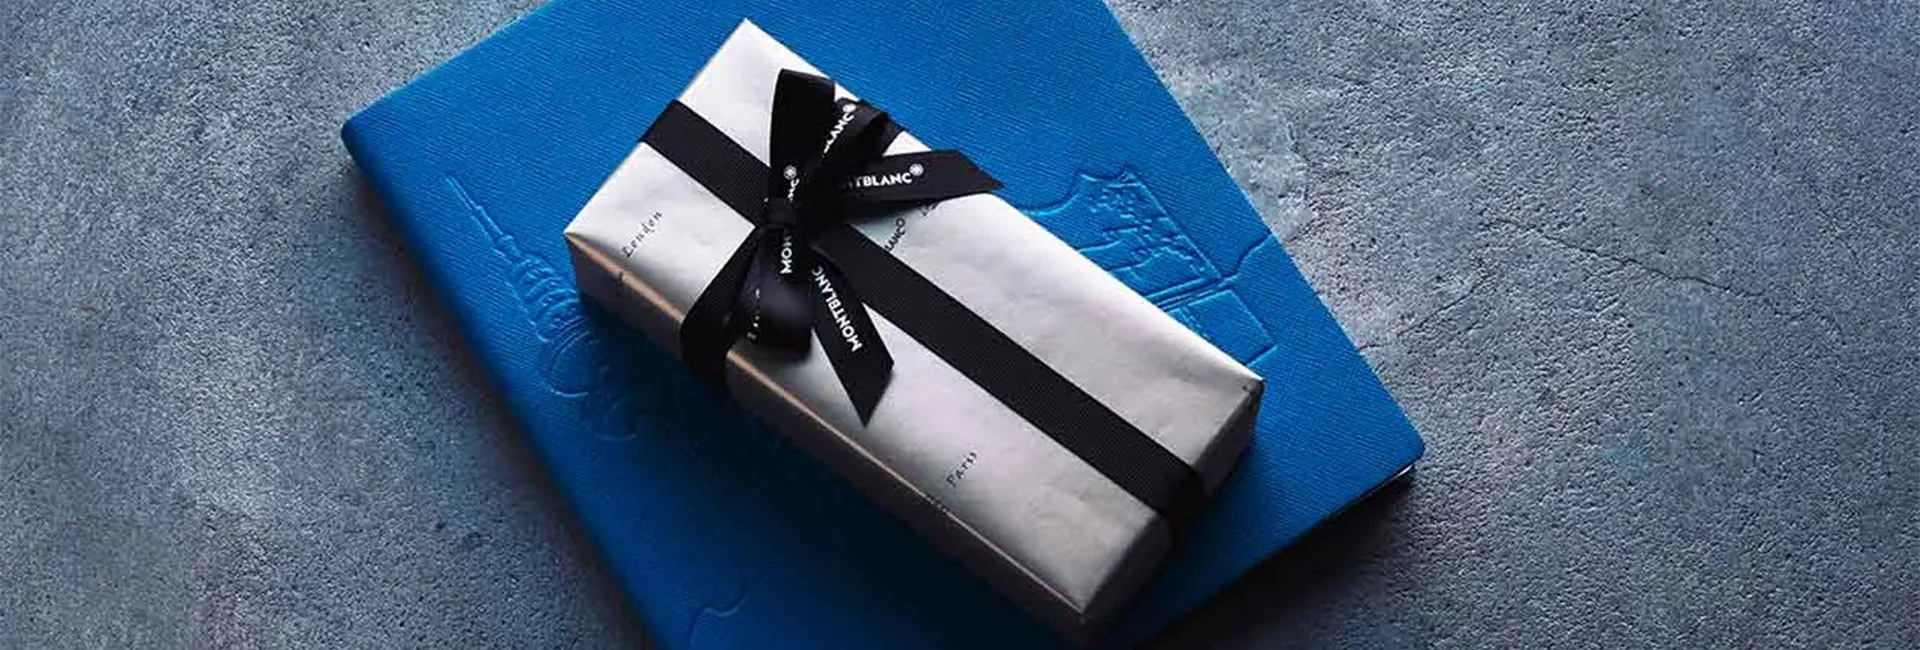 Montblanc Gifts